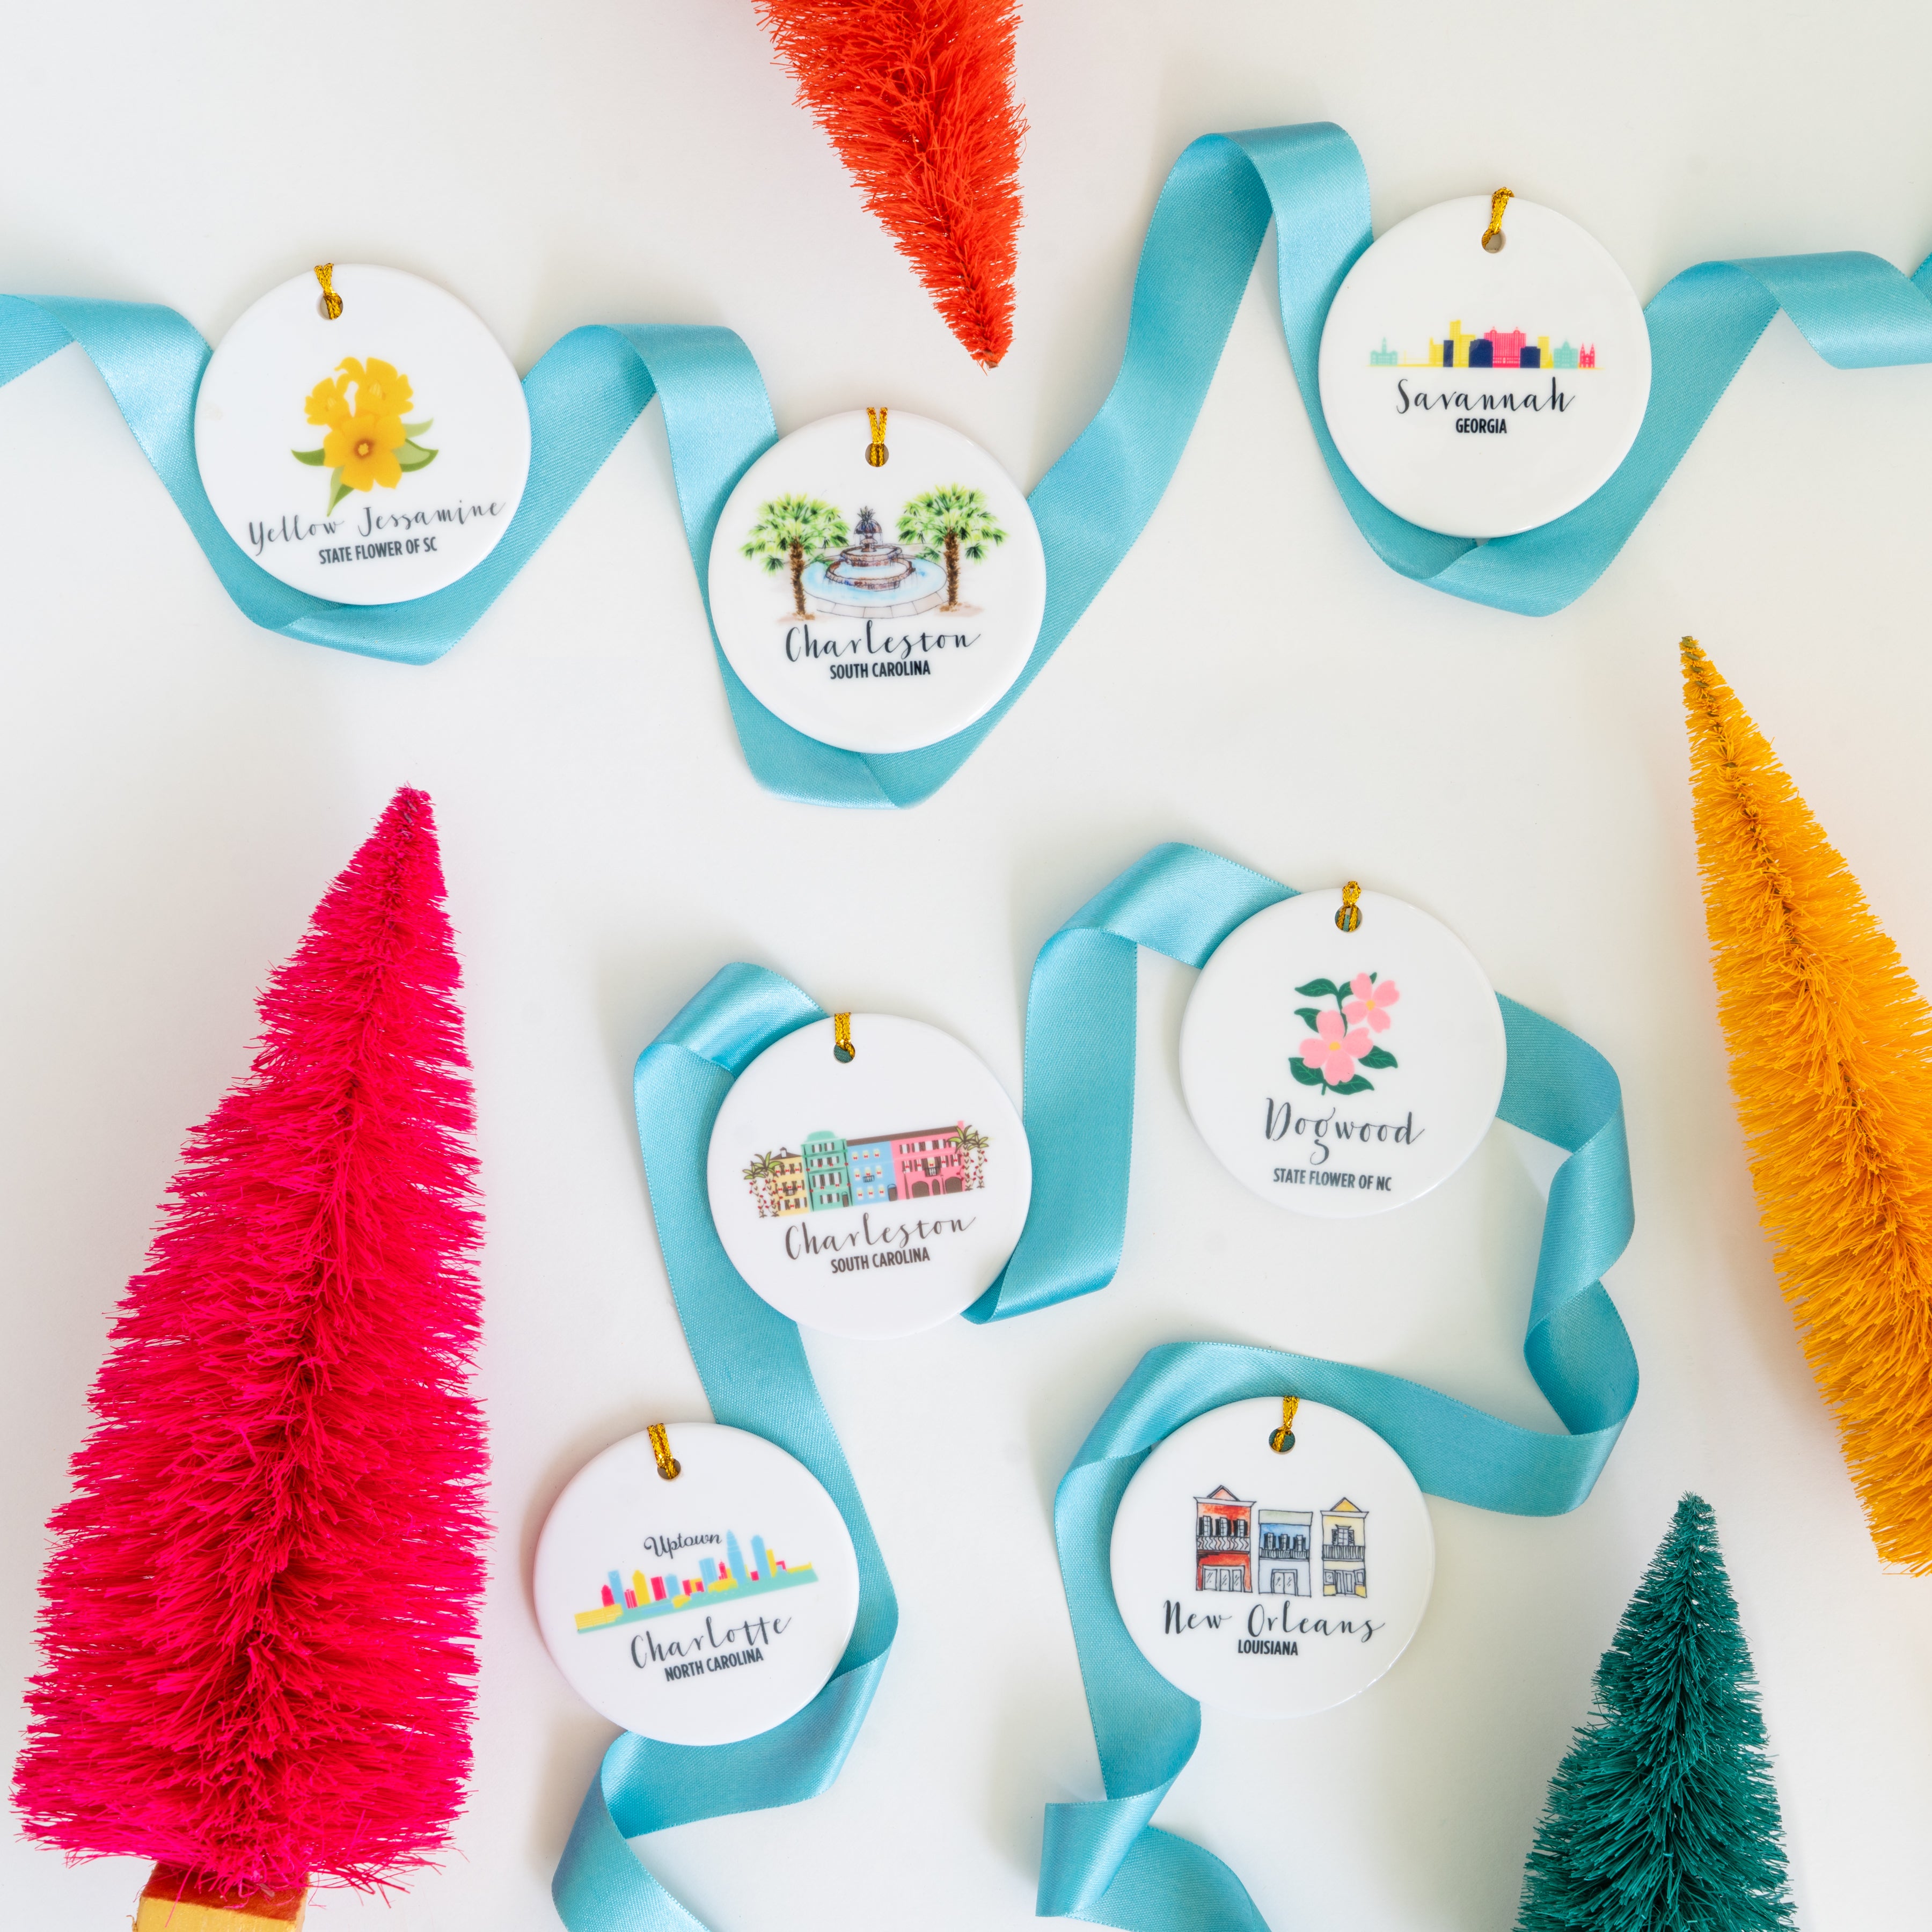 personalized ornaments for travel souvenirs